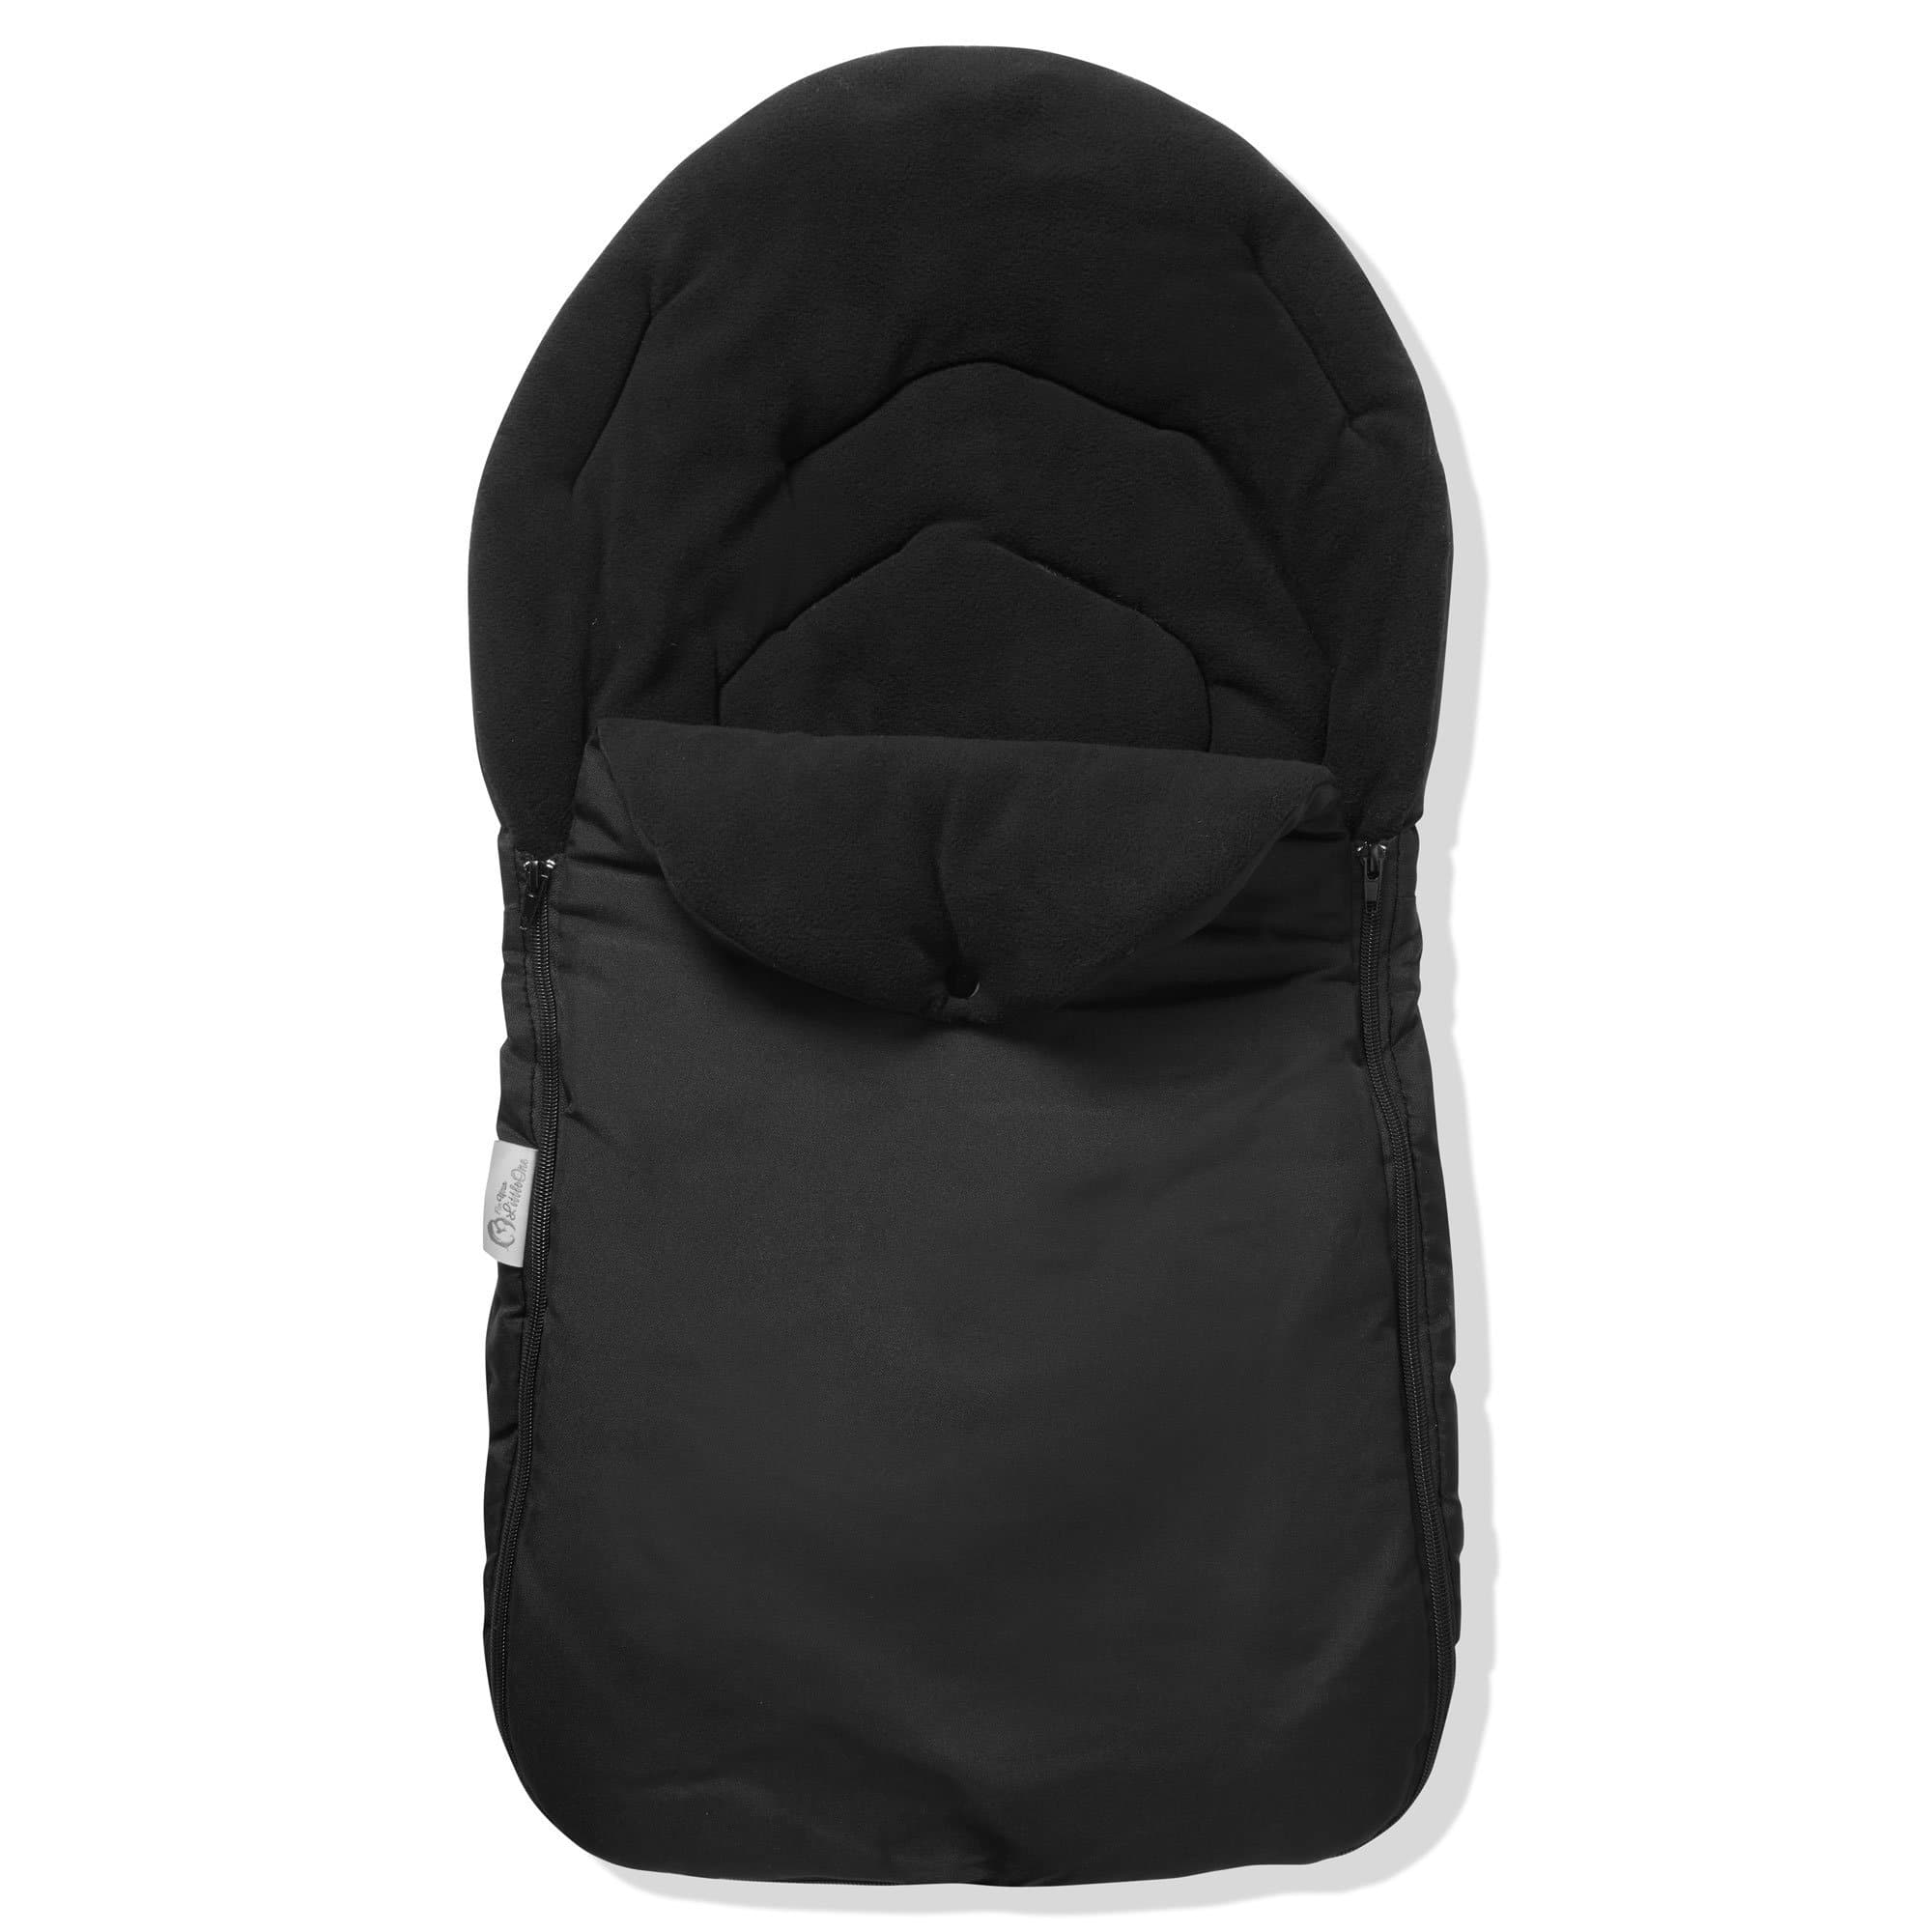 Car Seat Footmuff / Cosy Toes Compatible with My Babiie - Black / Fits All Models | For Your Little One